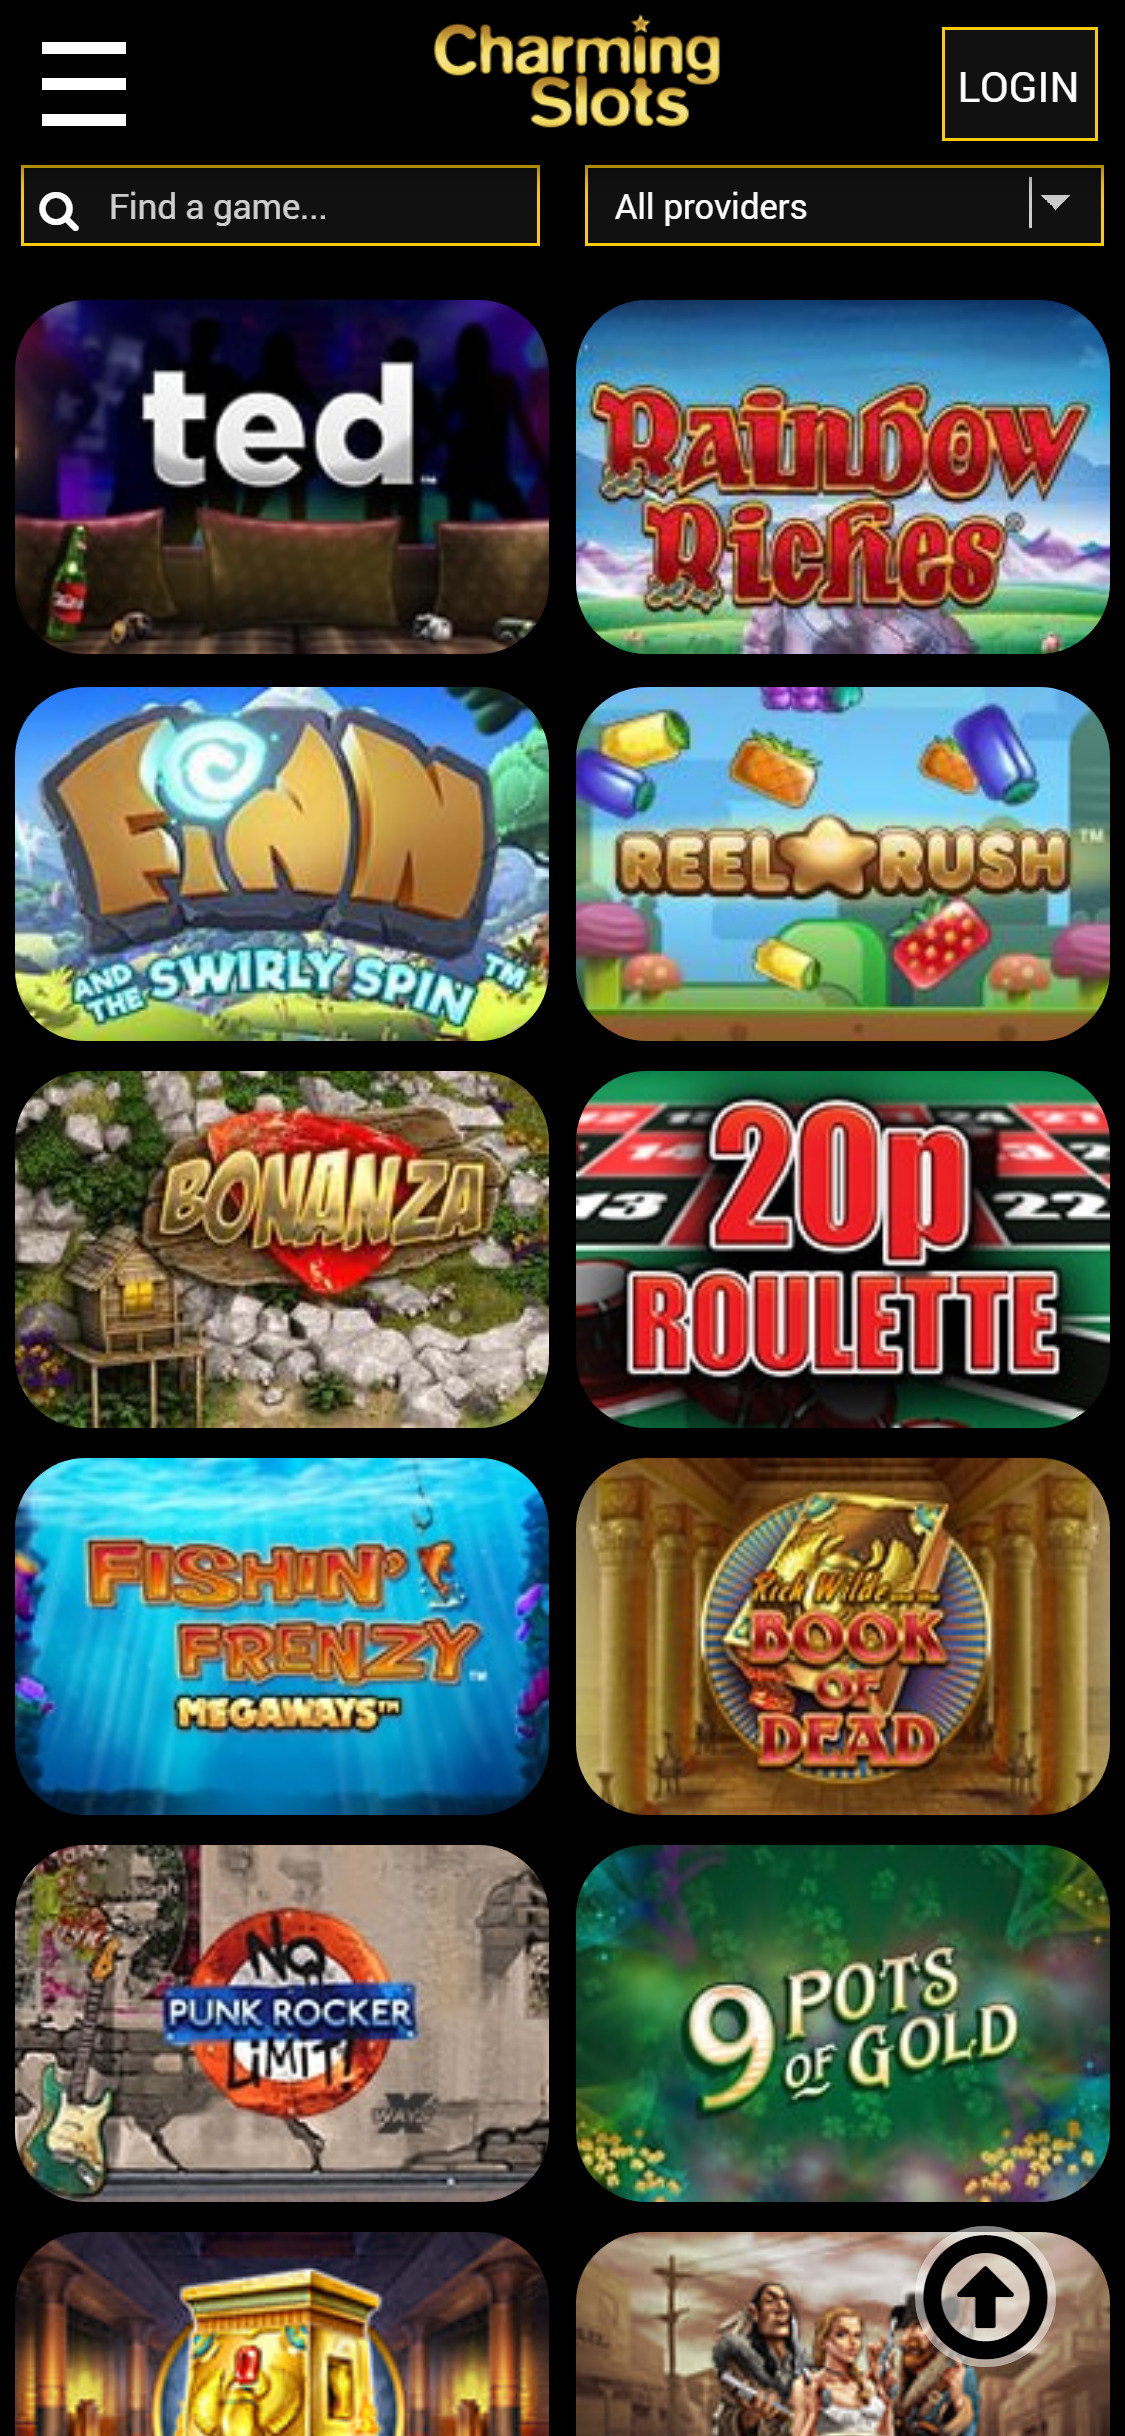 Charming Slots Casino Mobile Games Review